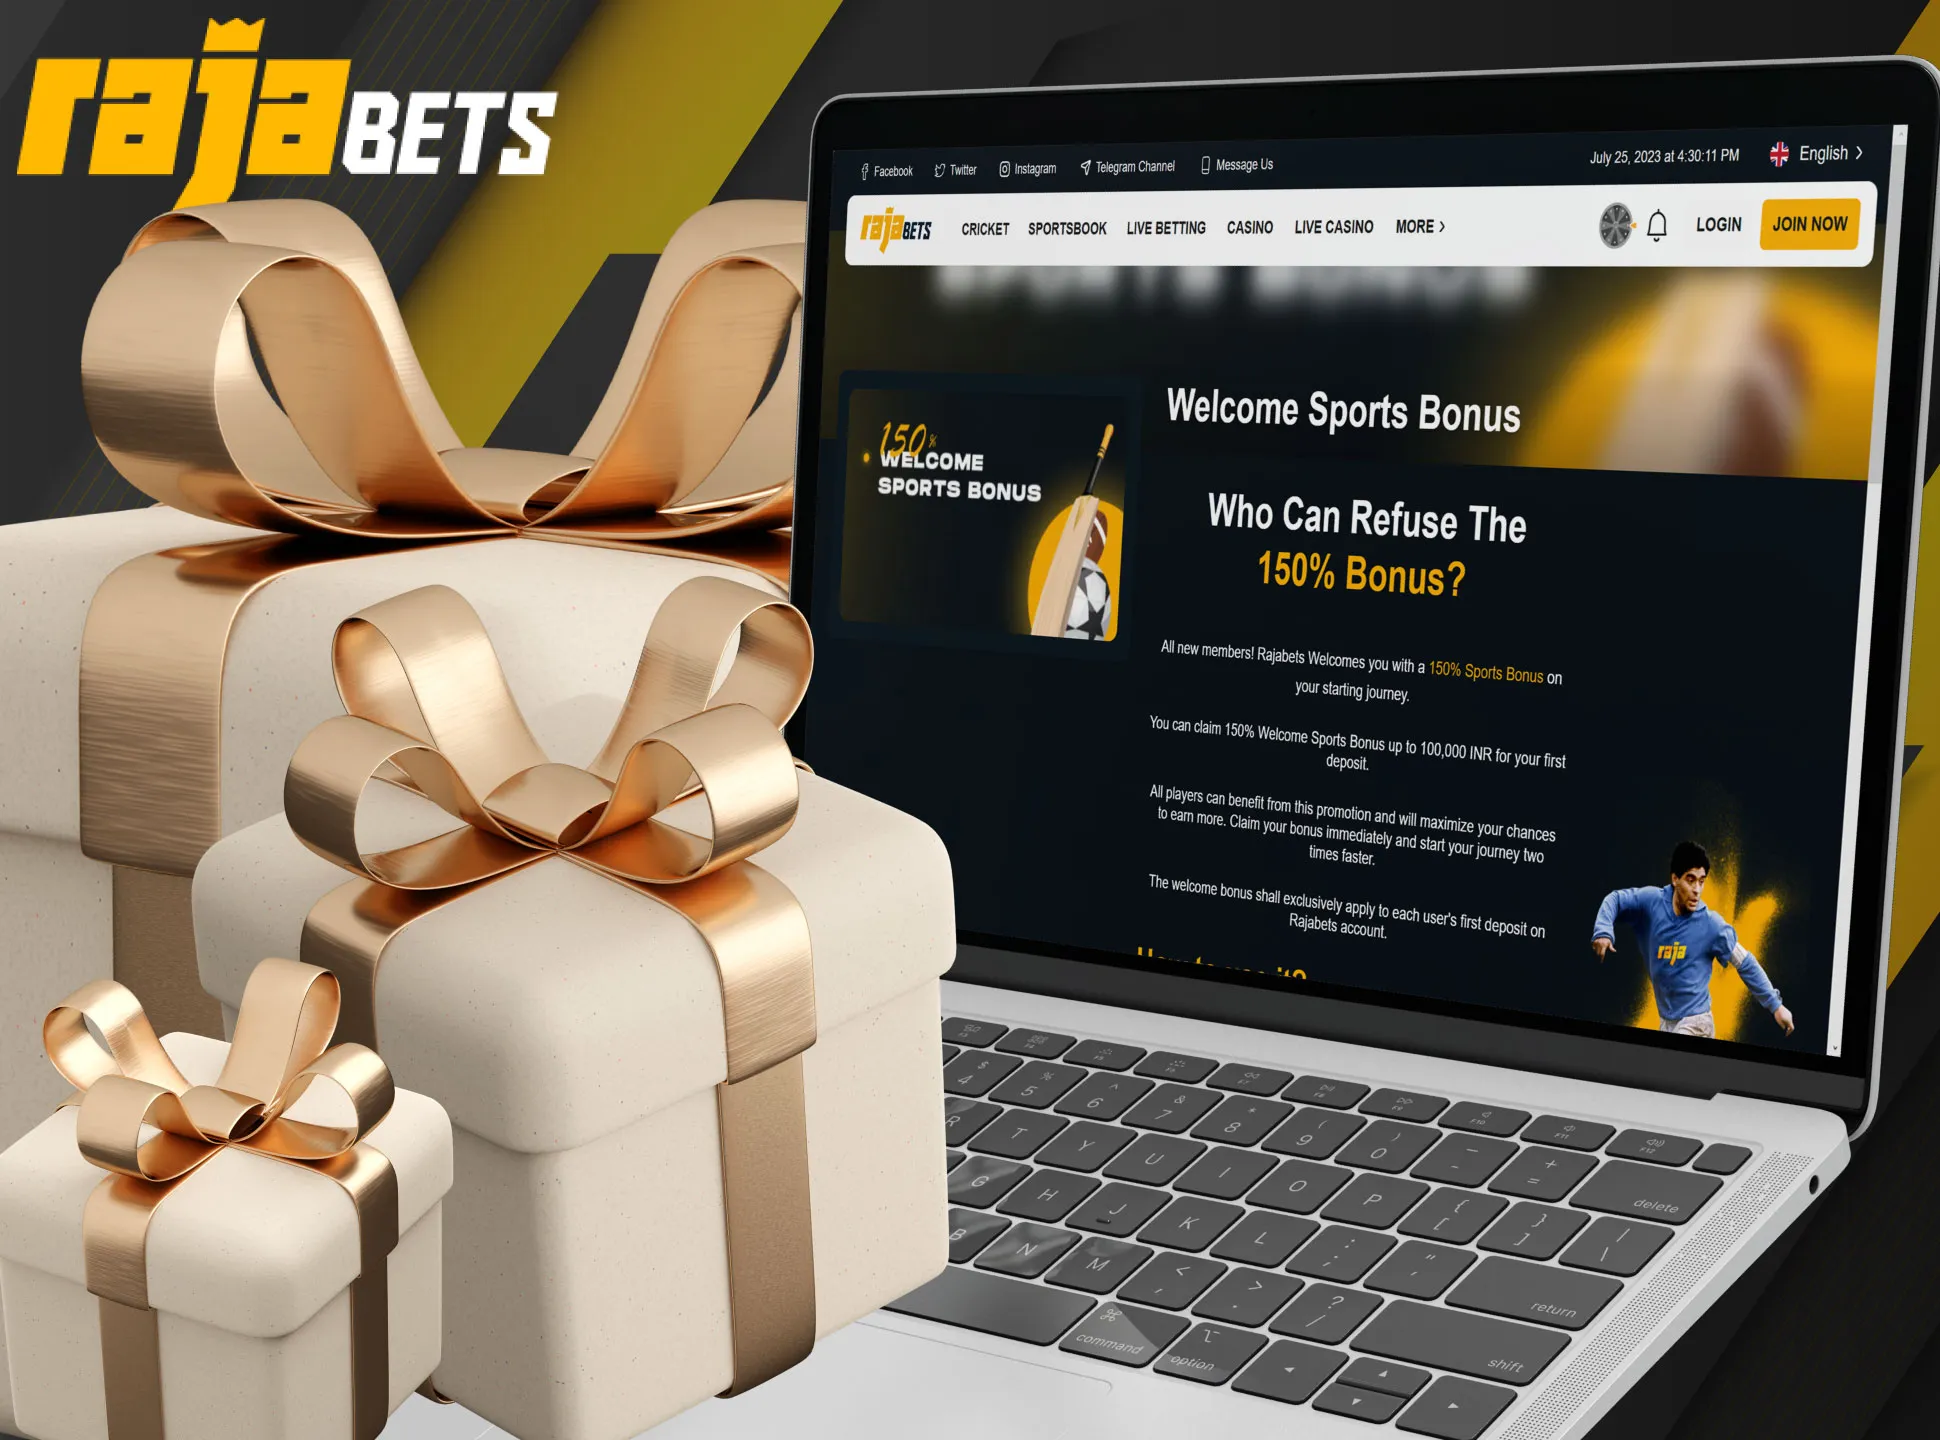 Rajabets offers various bonuses and promotions for both new and regular player.